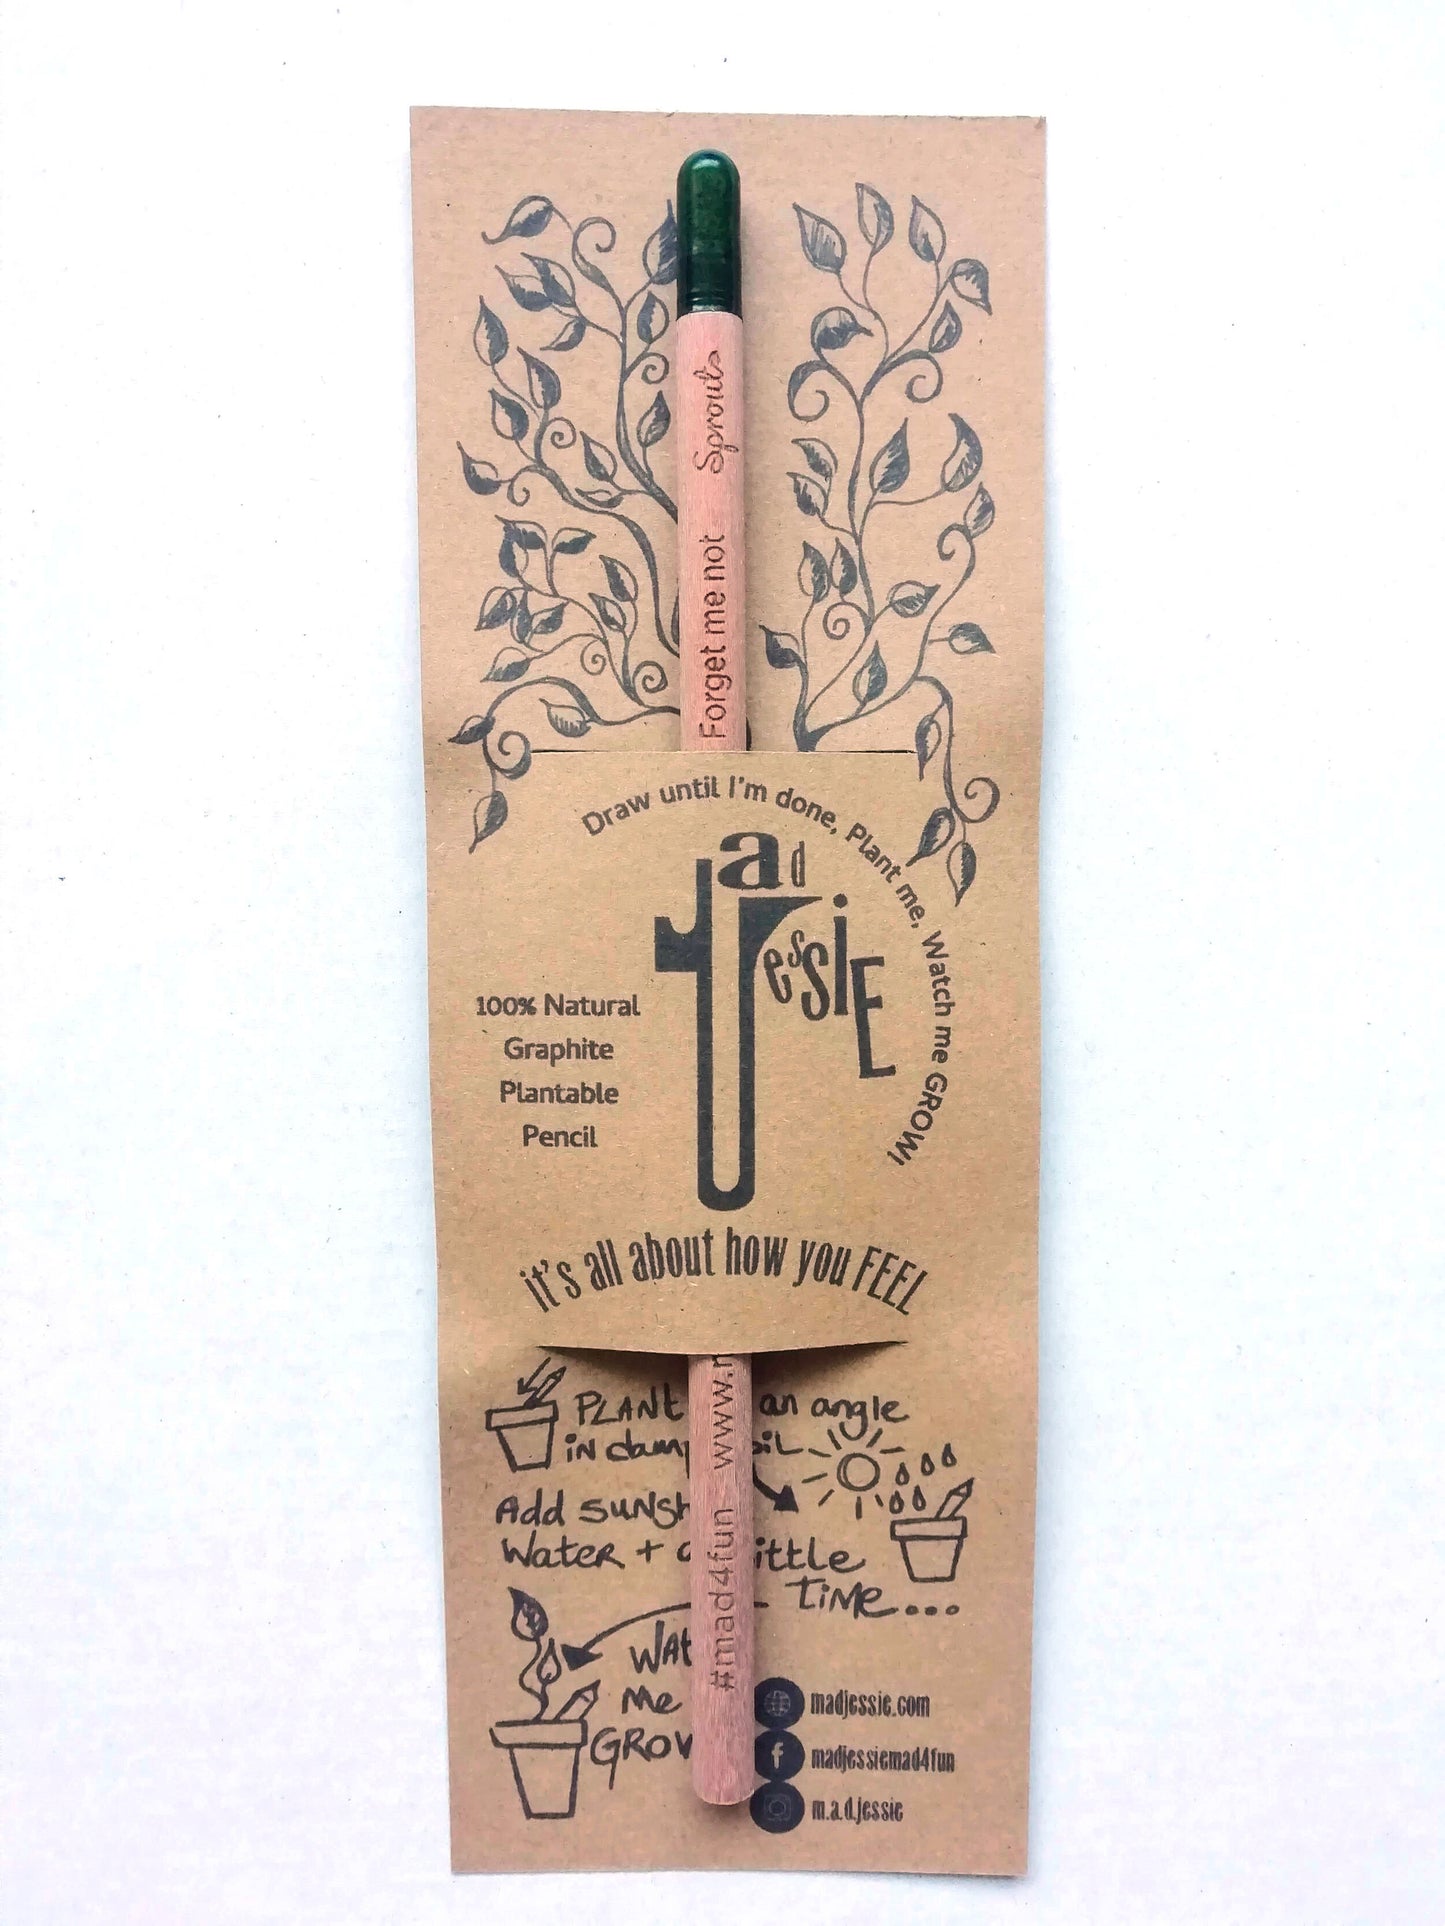 100% Natural Graphite Sprout Plantable Pencil - Thyme, Basil, Coriander, Daisy, Forget-me-not, Sunflower, Chia